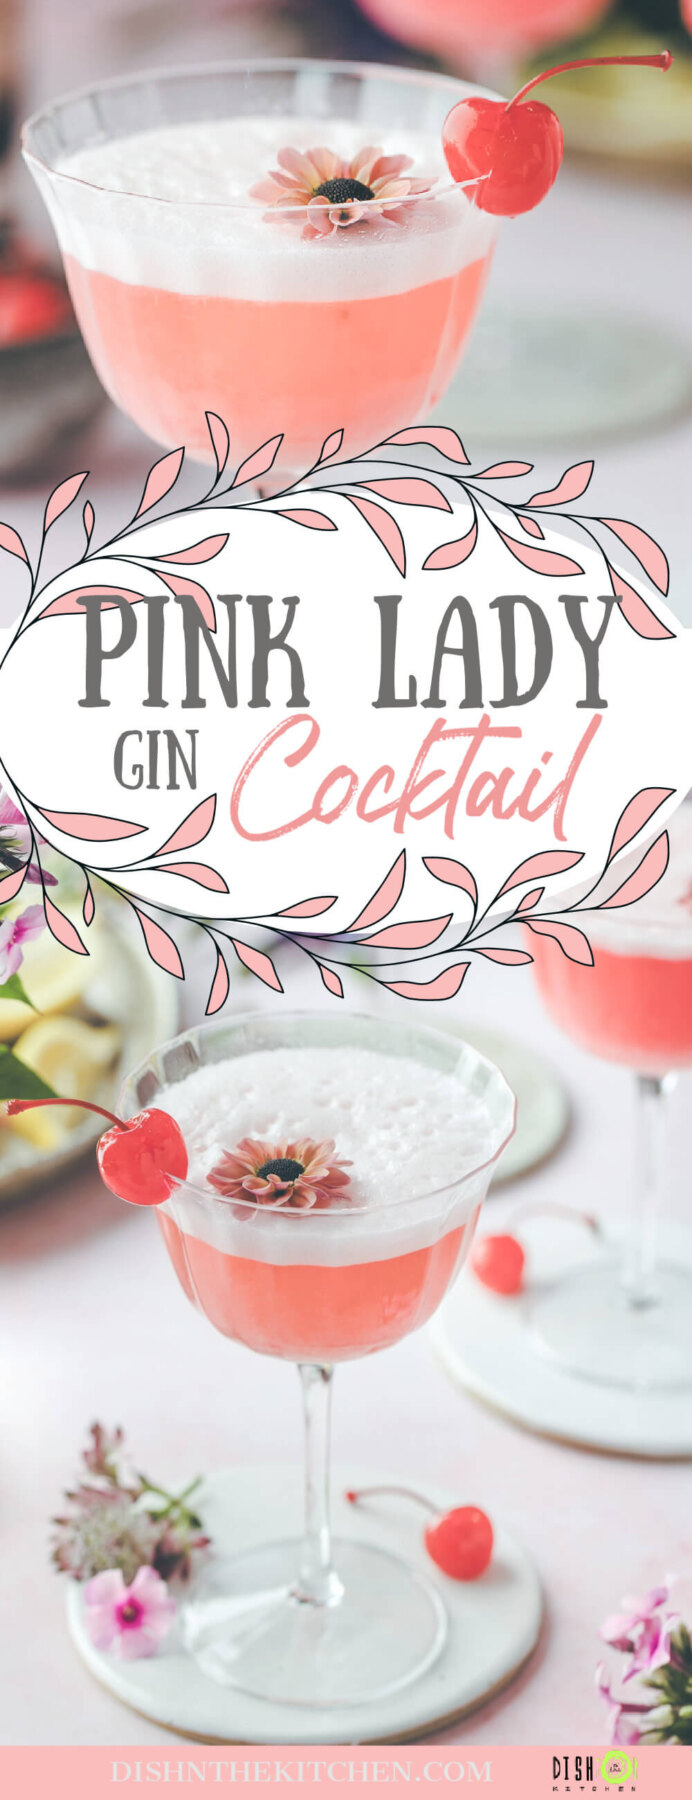 Pinterest image featuring a foamy pink lady cocktail in a coupe glass garnished with a cherry and an edible flower.